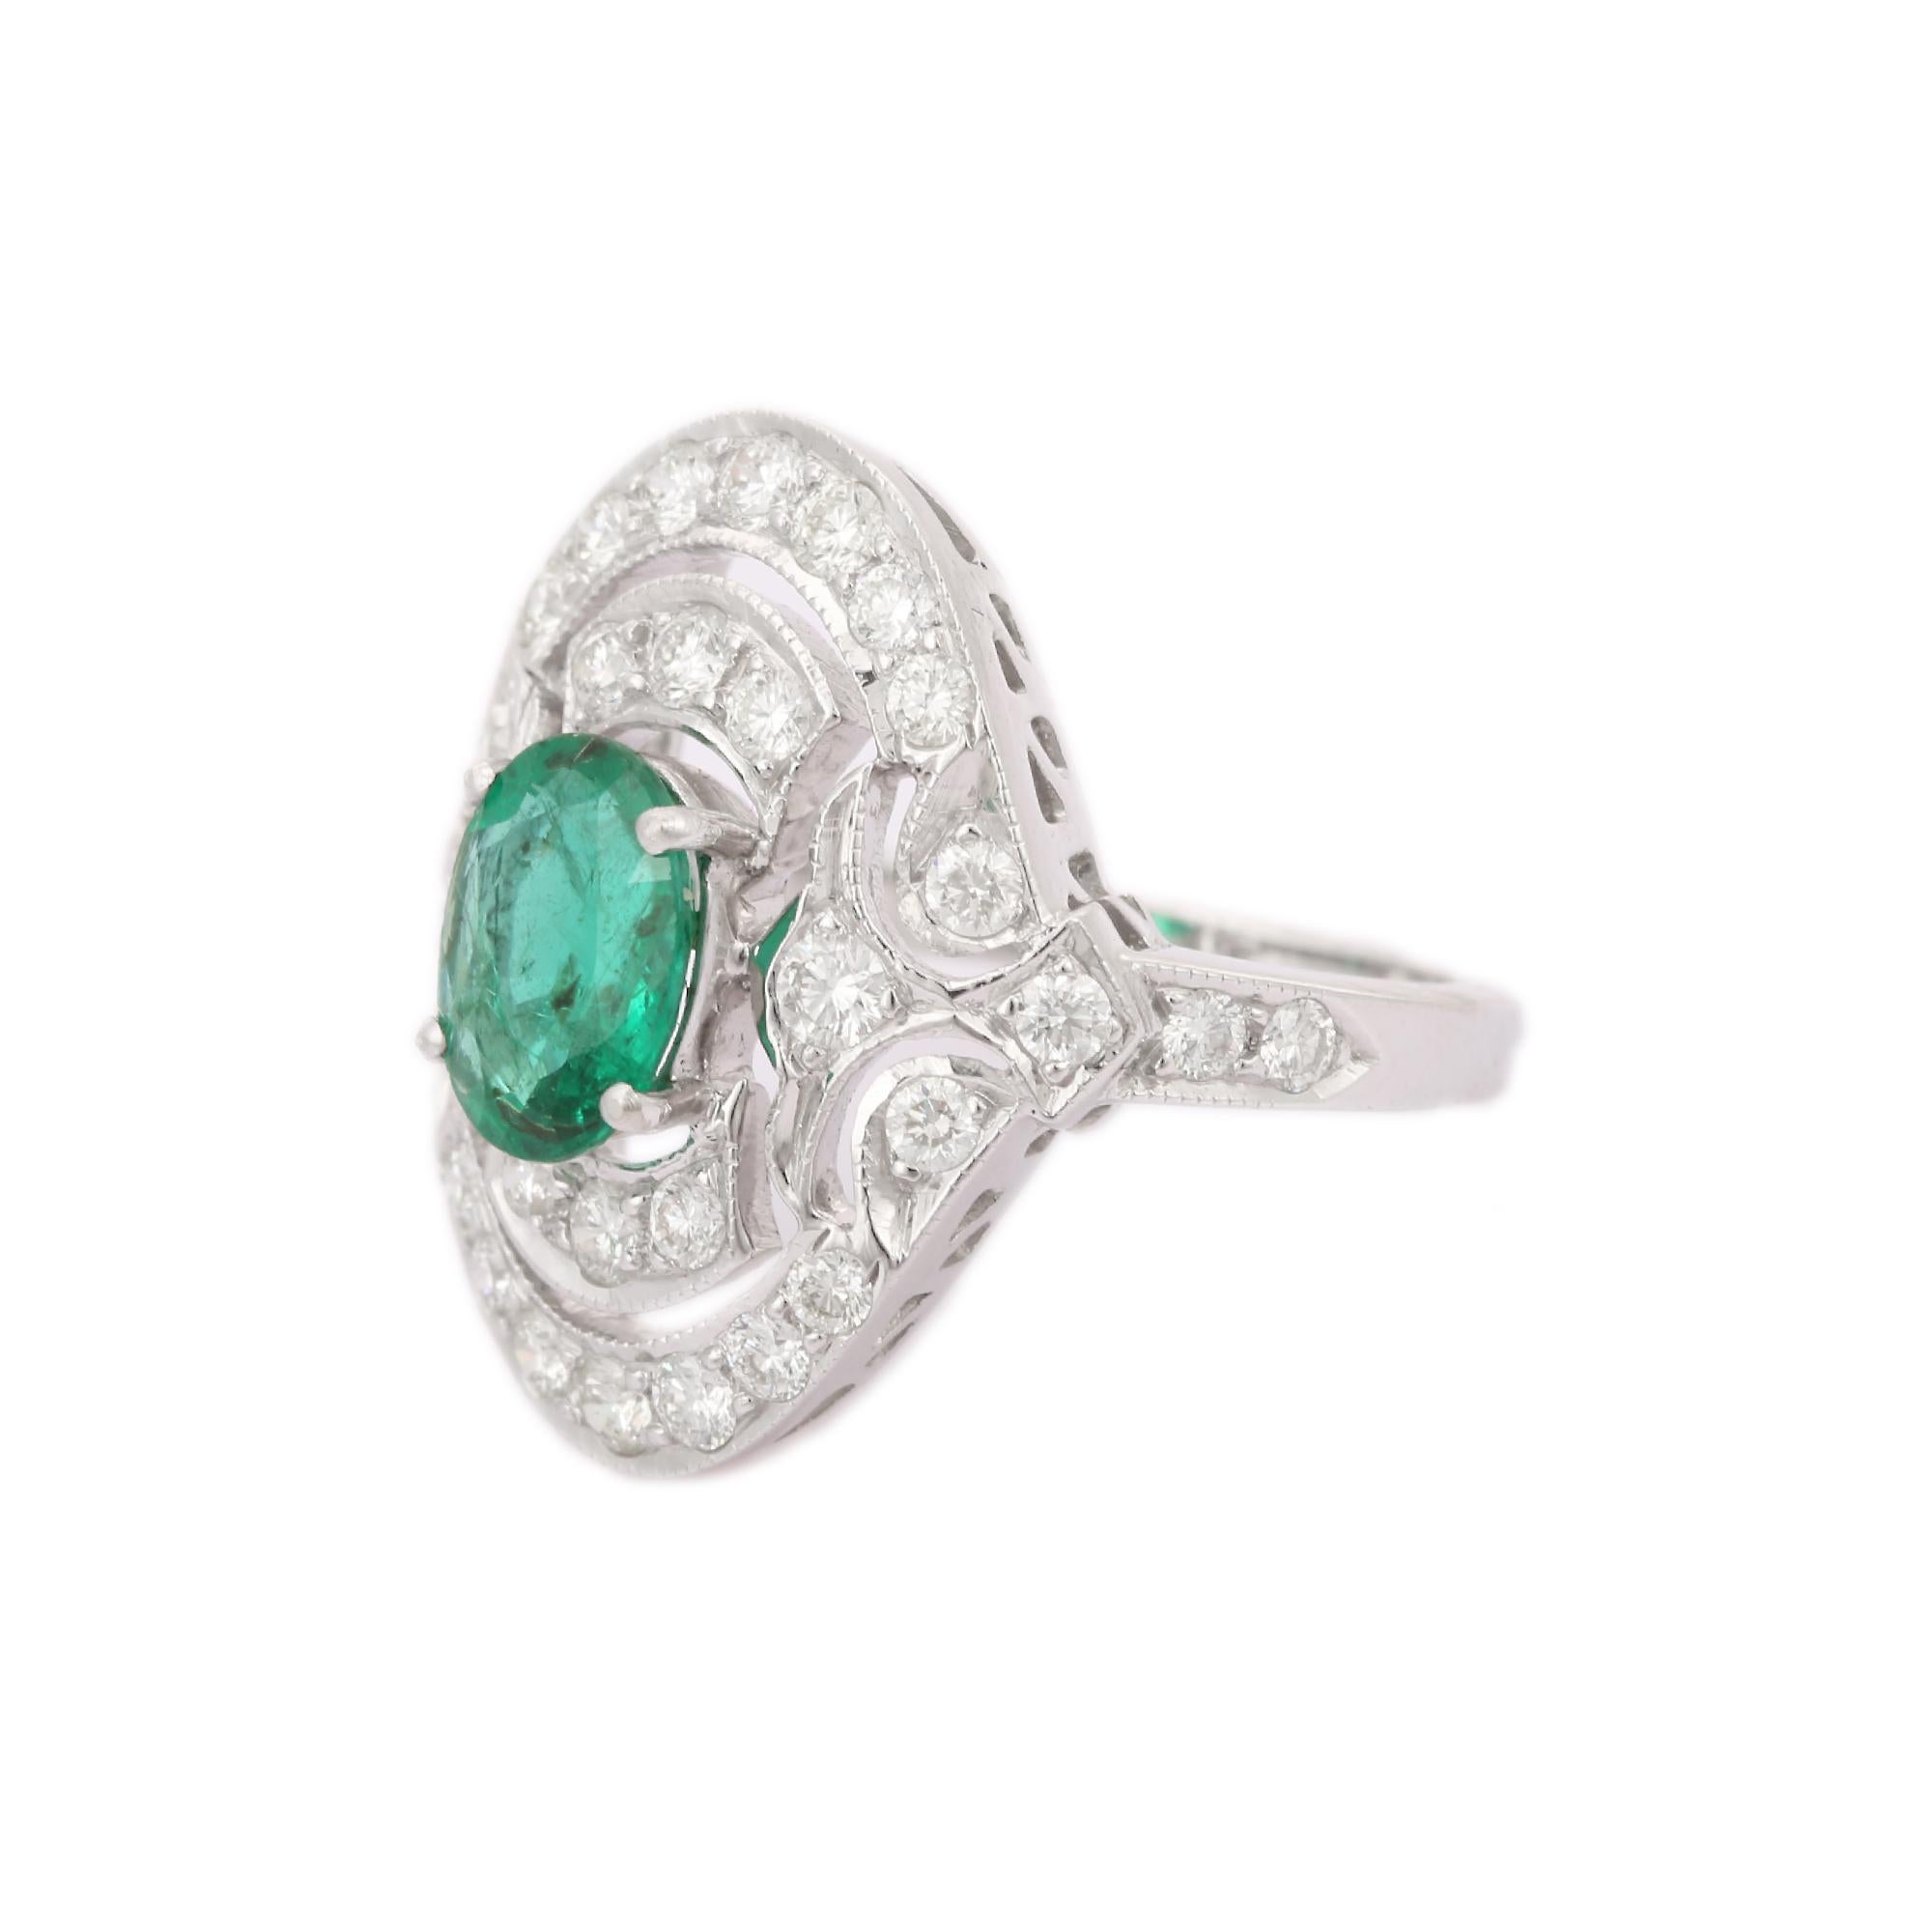 For Sale:  18kt Solid White Gold Art Deco Emerald Diamond Ring 5